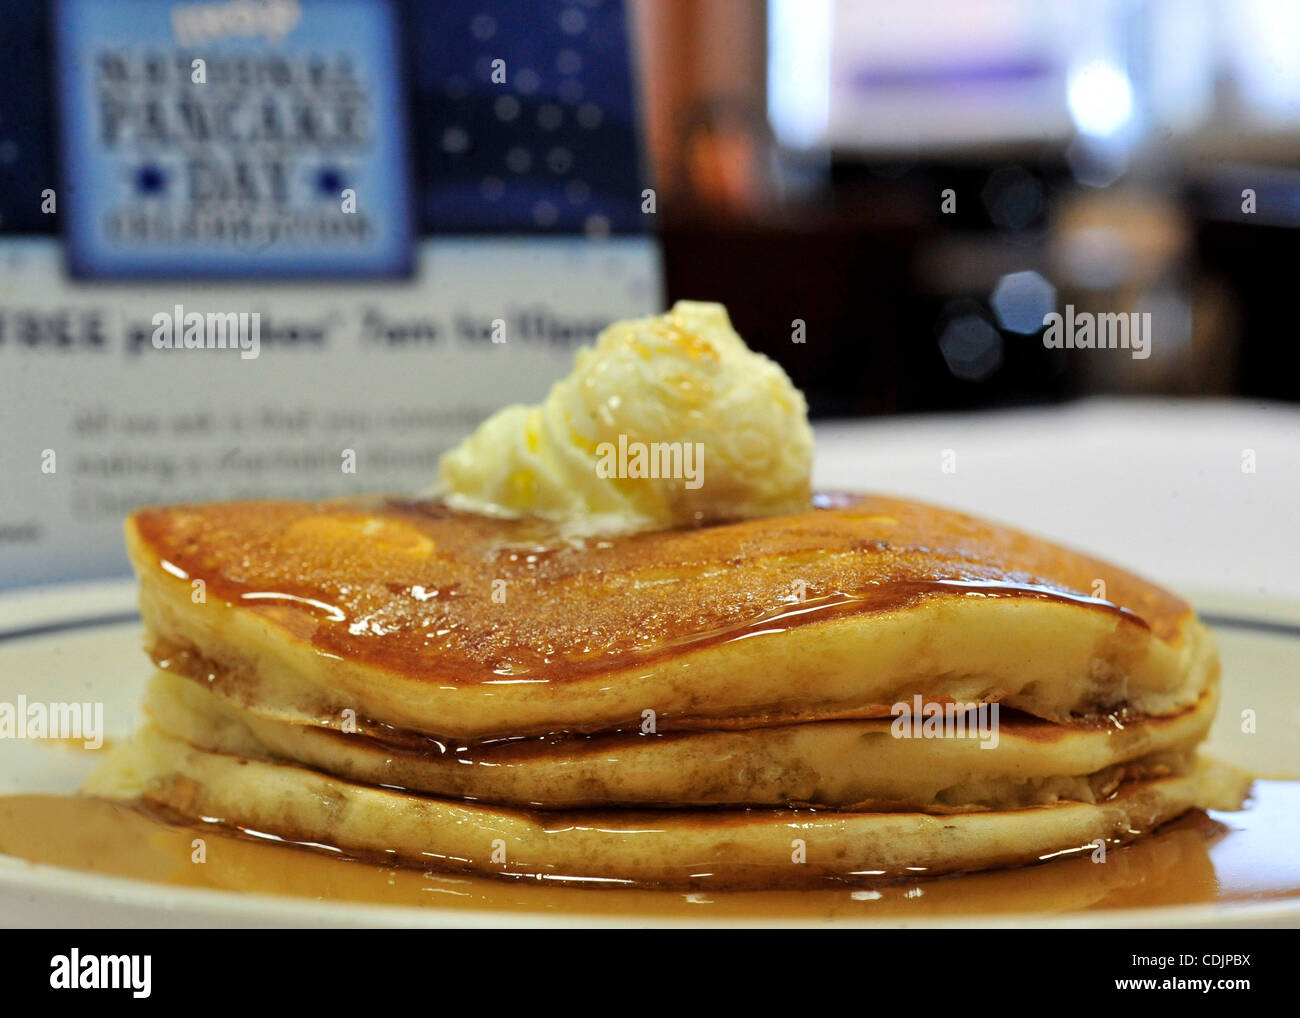 The international house of pancakes in New York: 1 reviews and 1